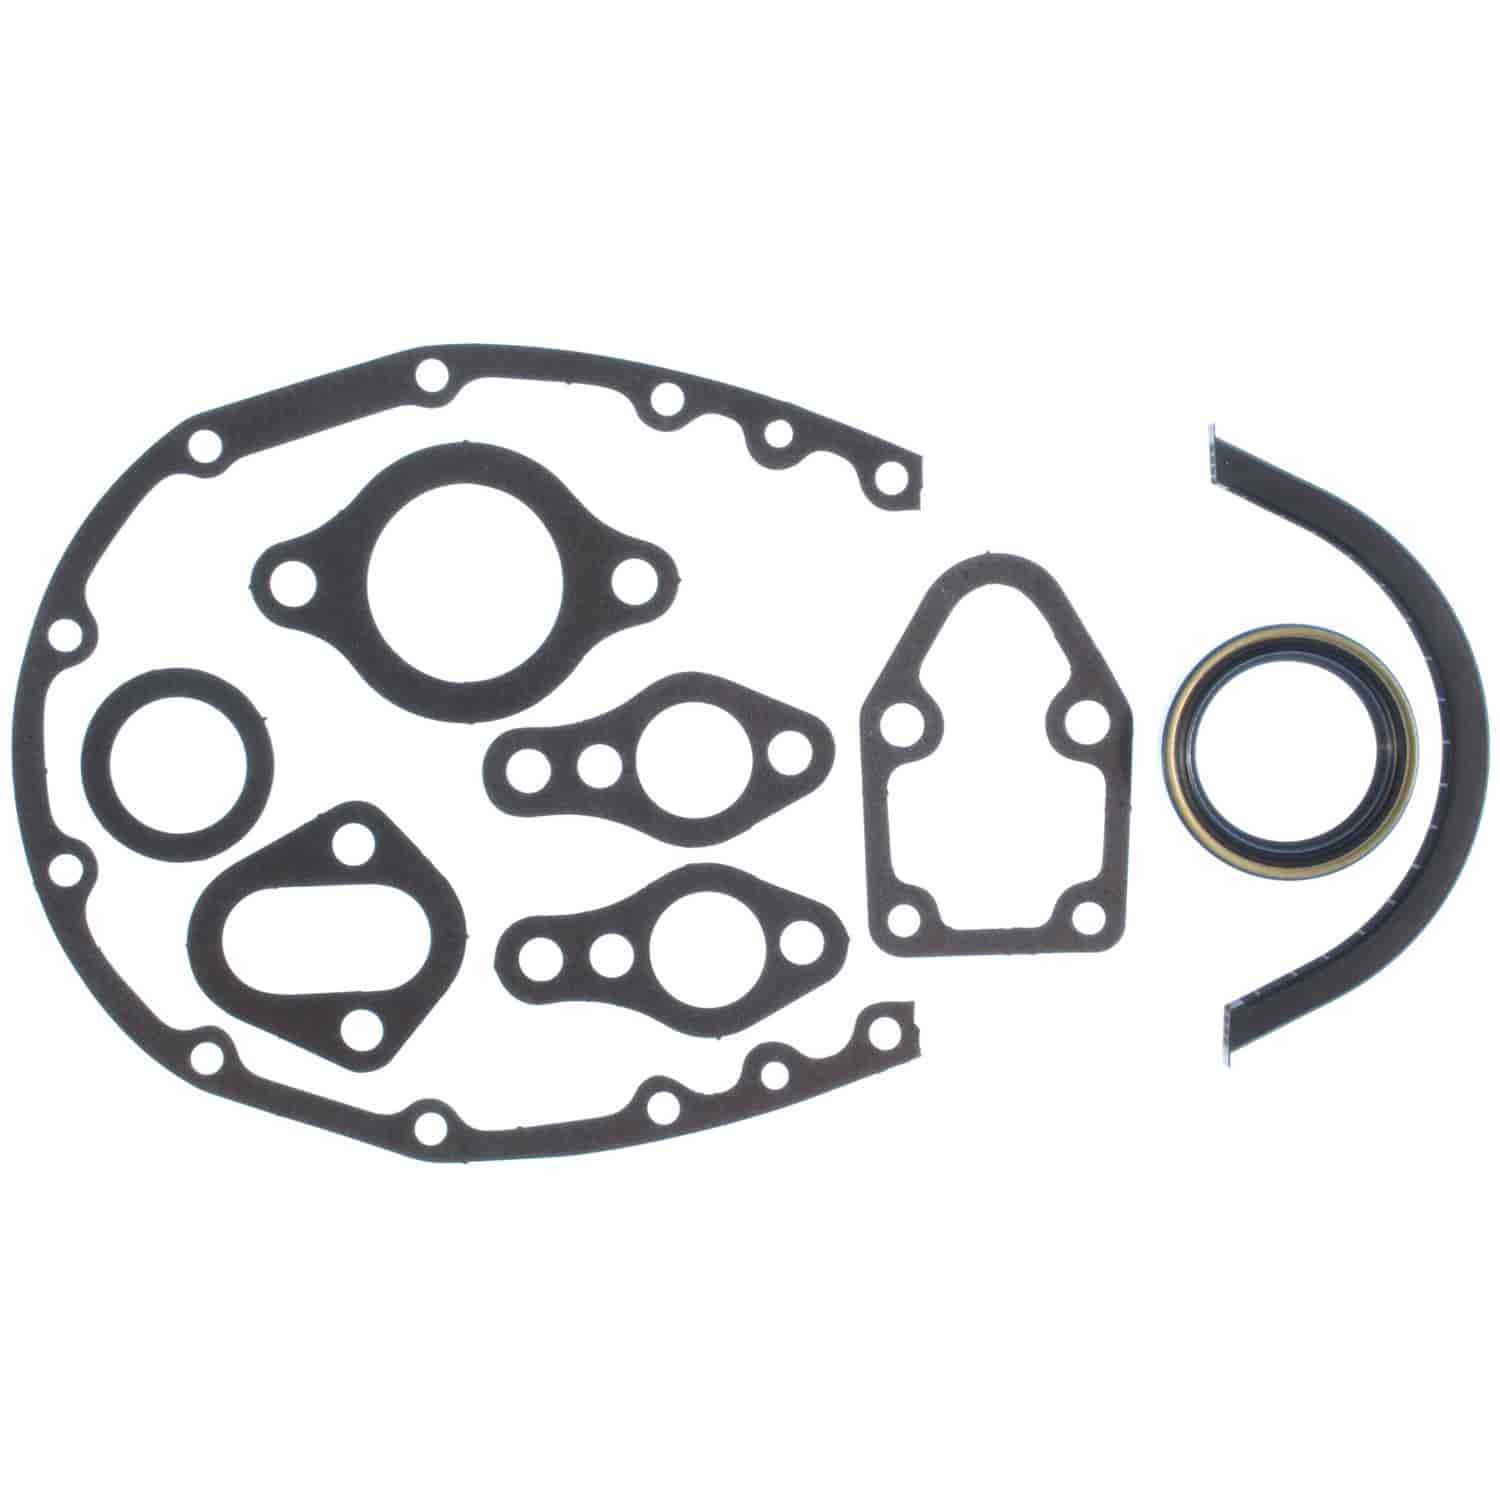 Timing Cover Gasket Set 1975-1986 Small Block Chevy 262/305/350/400